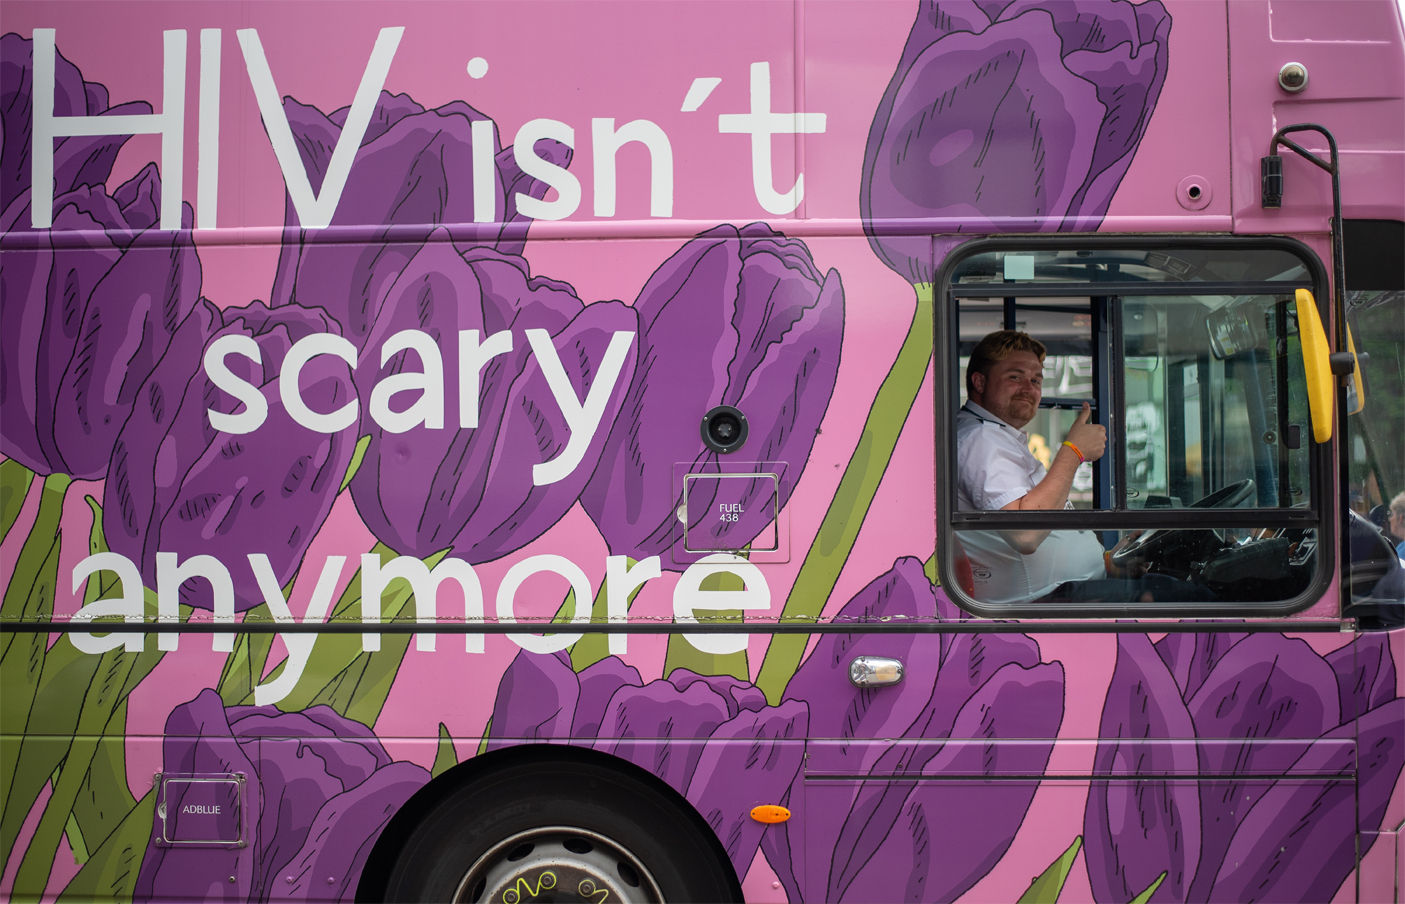 Bus with writing that says 'HIV isn't scary anymore' with a driver inside giving a thumbs up to the camera